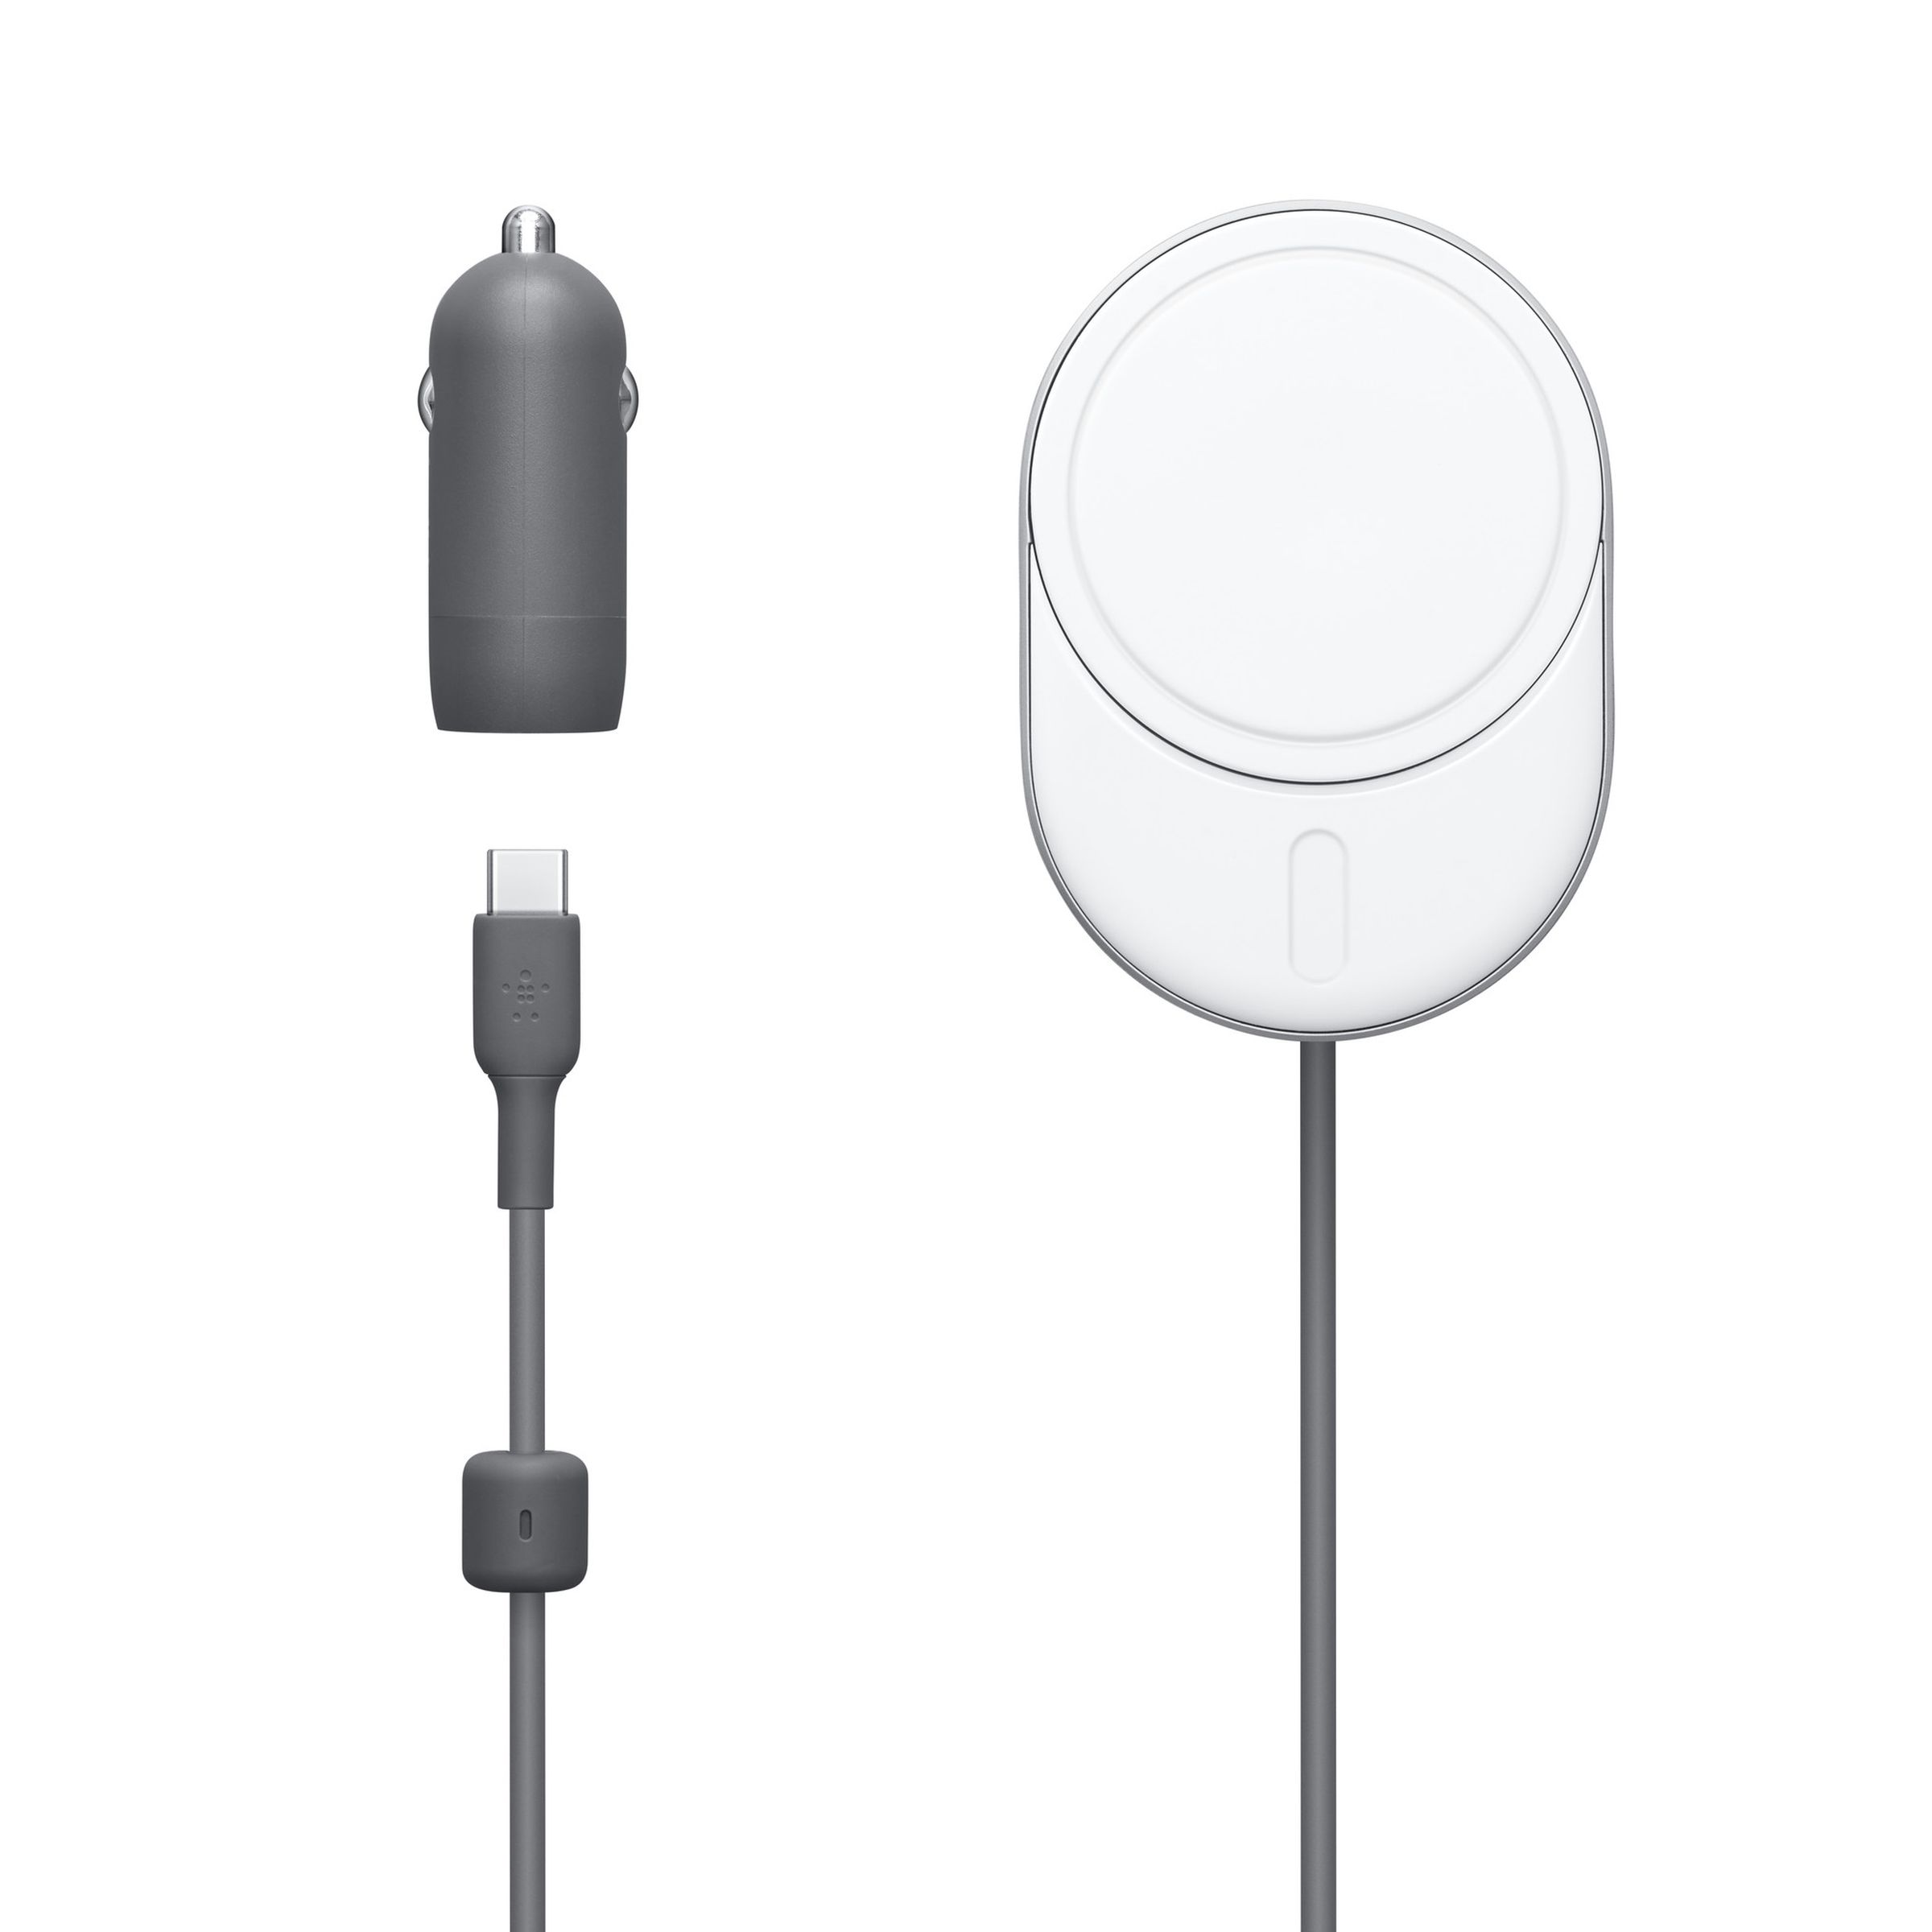 Image of the Belkin charging pad, its integrated USB-C cable, and the car charger adapter.